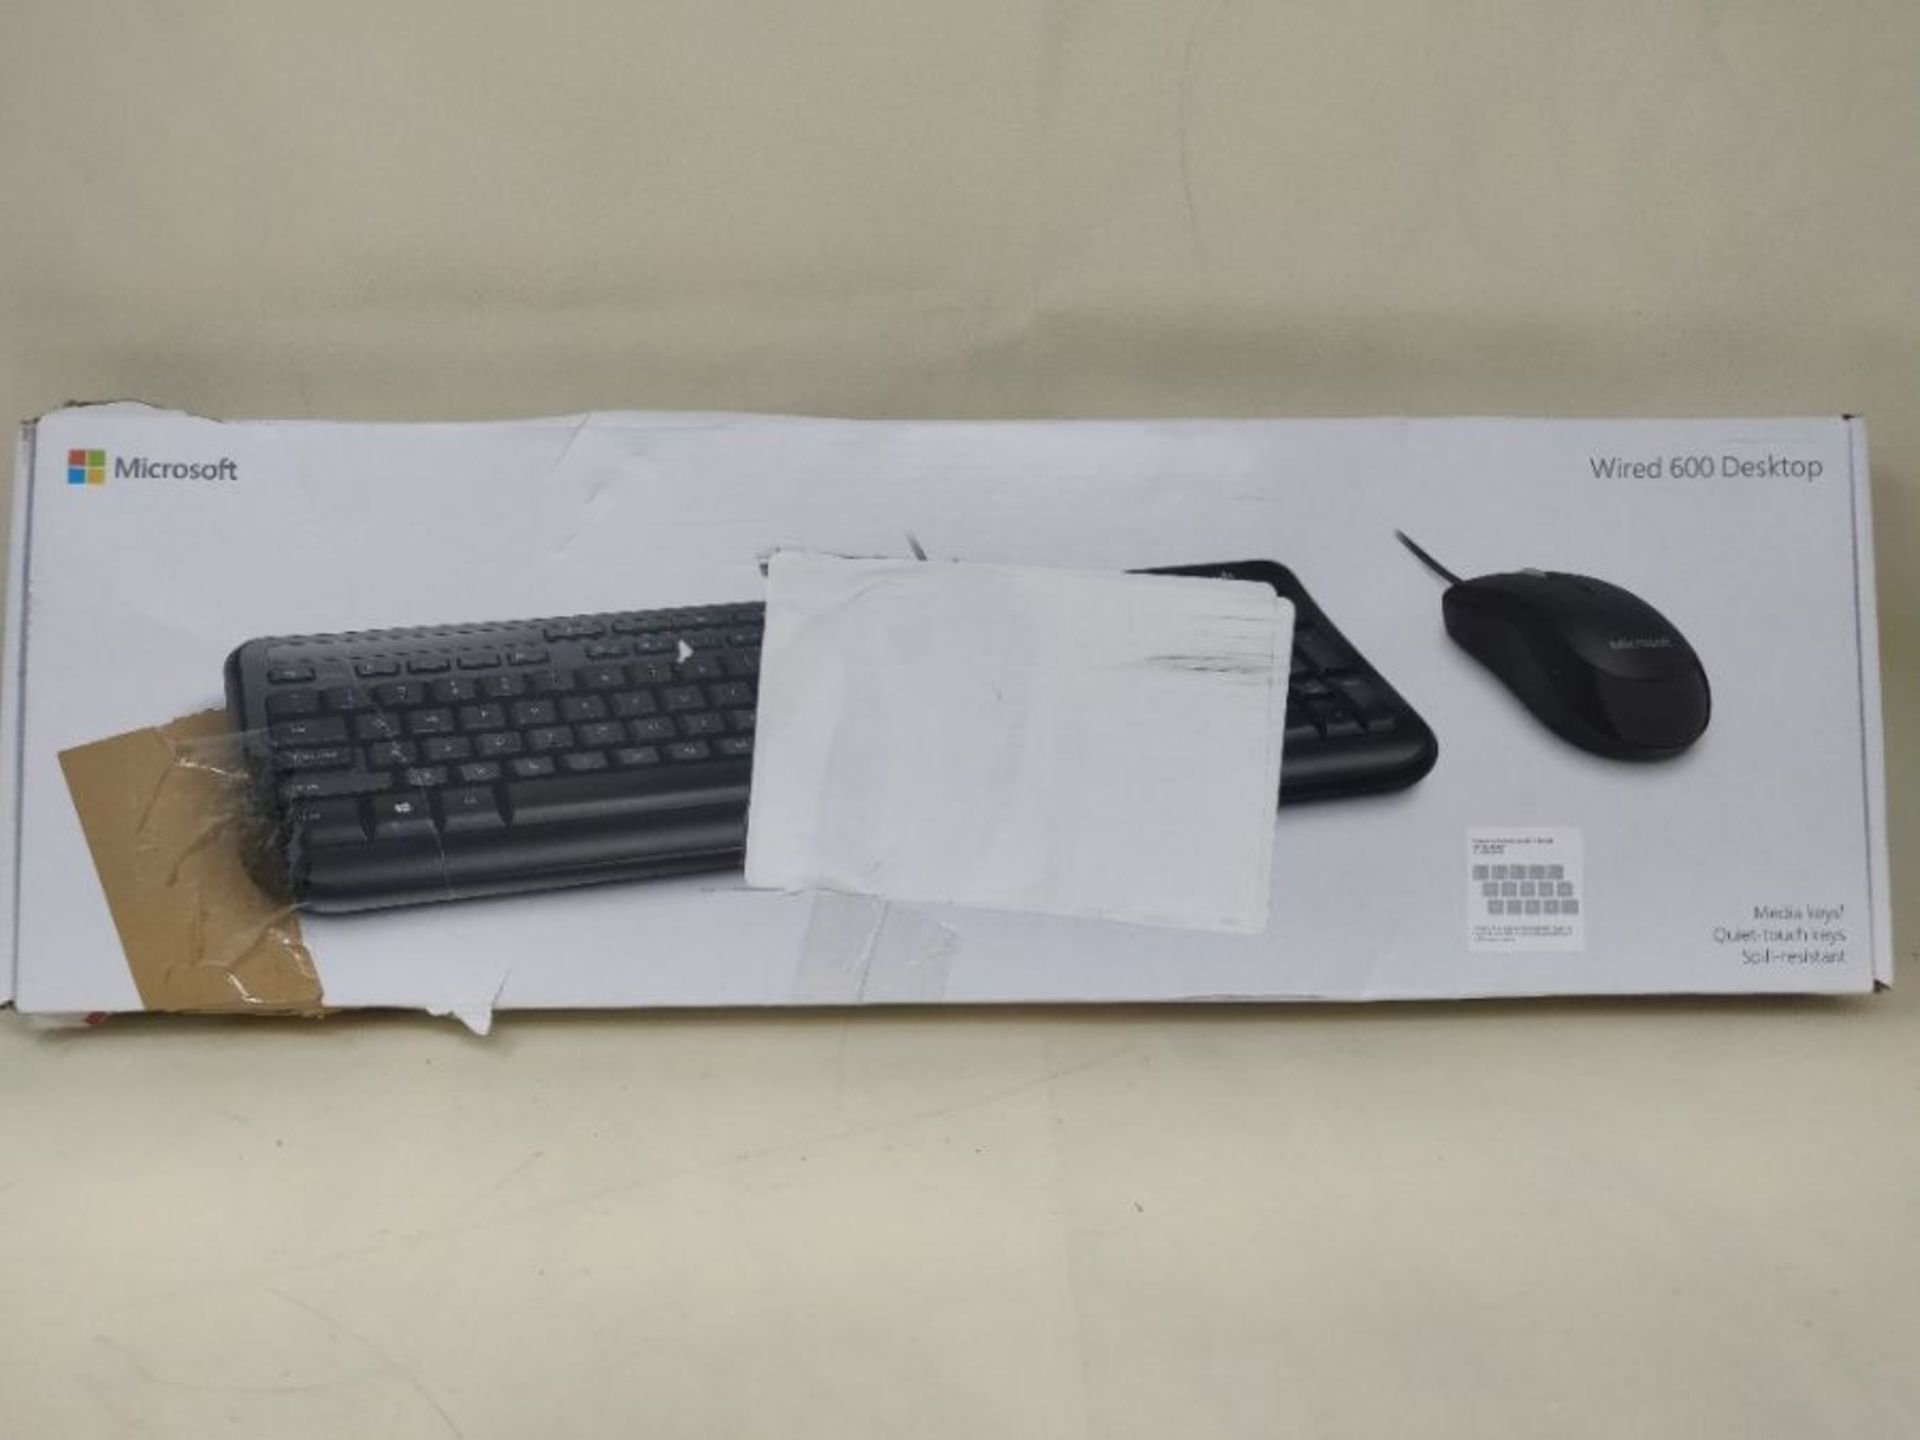 [INCOMPLETE] Microsoft Wired Desktop 600 Keyboard and Mouse Set, UK Layout - Black - Image 2 of 3